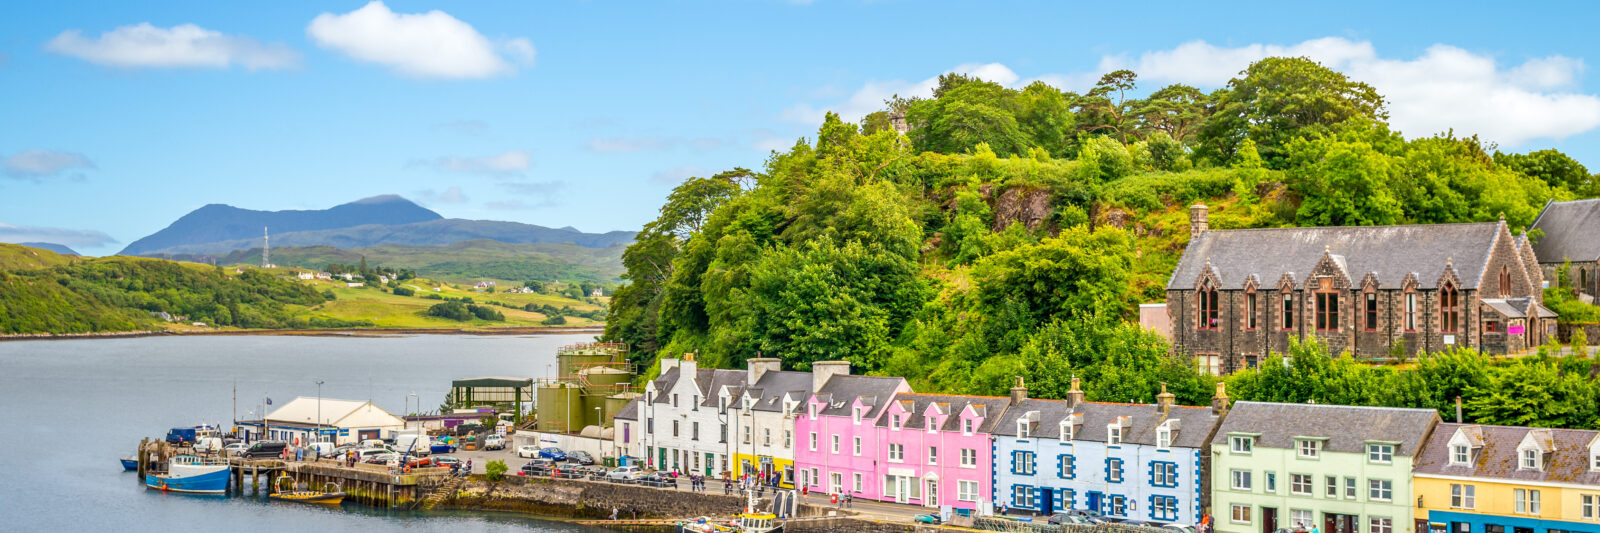 View of the colorful harbor of Portree